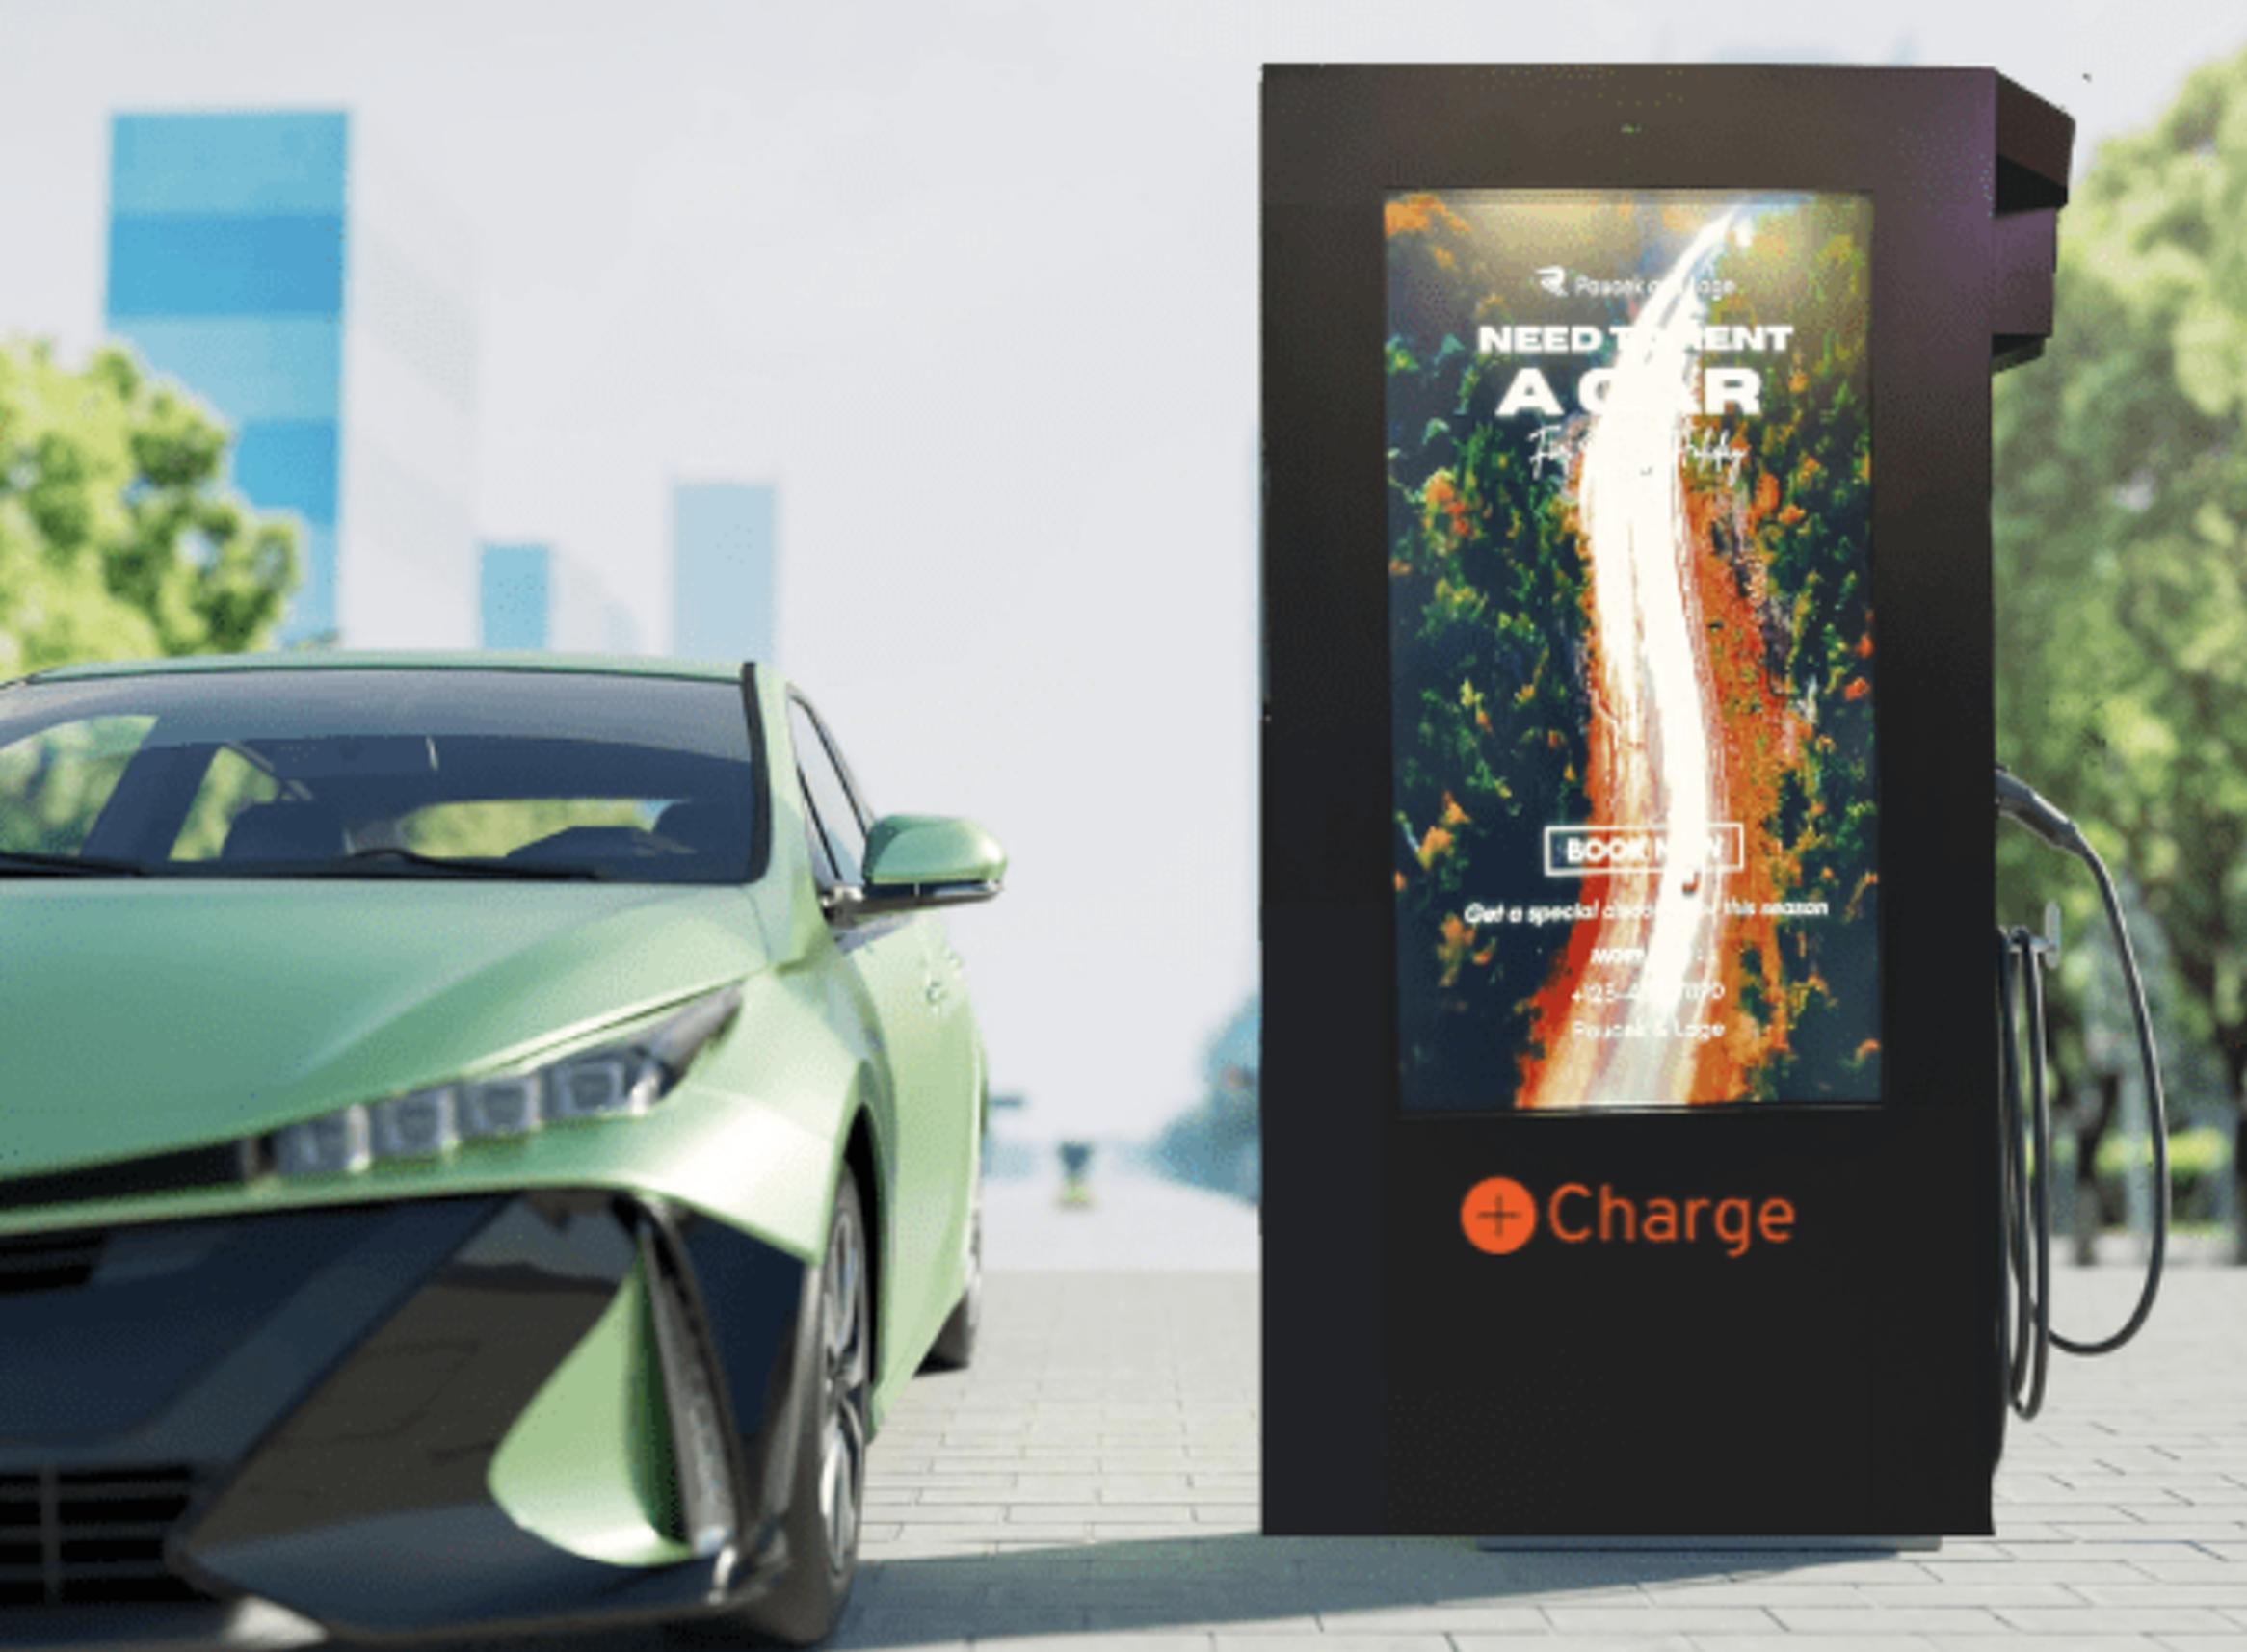 Big screen EV charger offers advertising opportunities